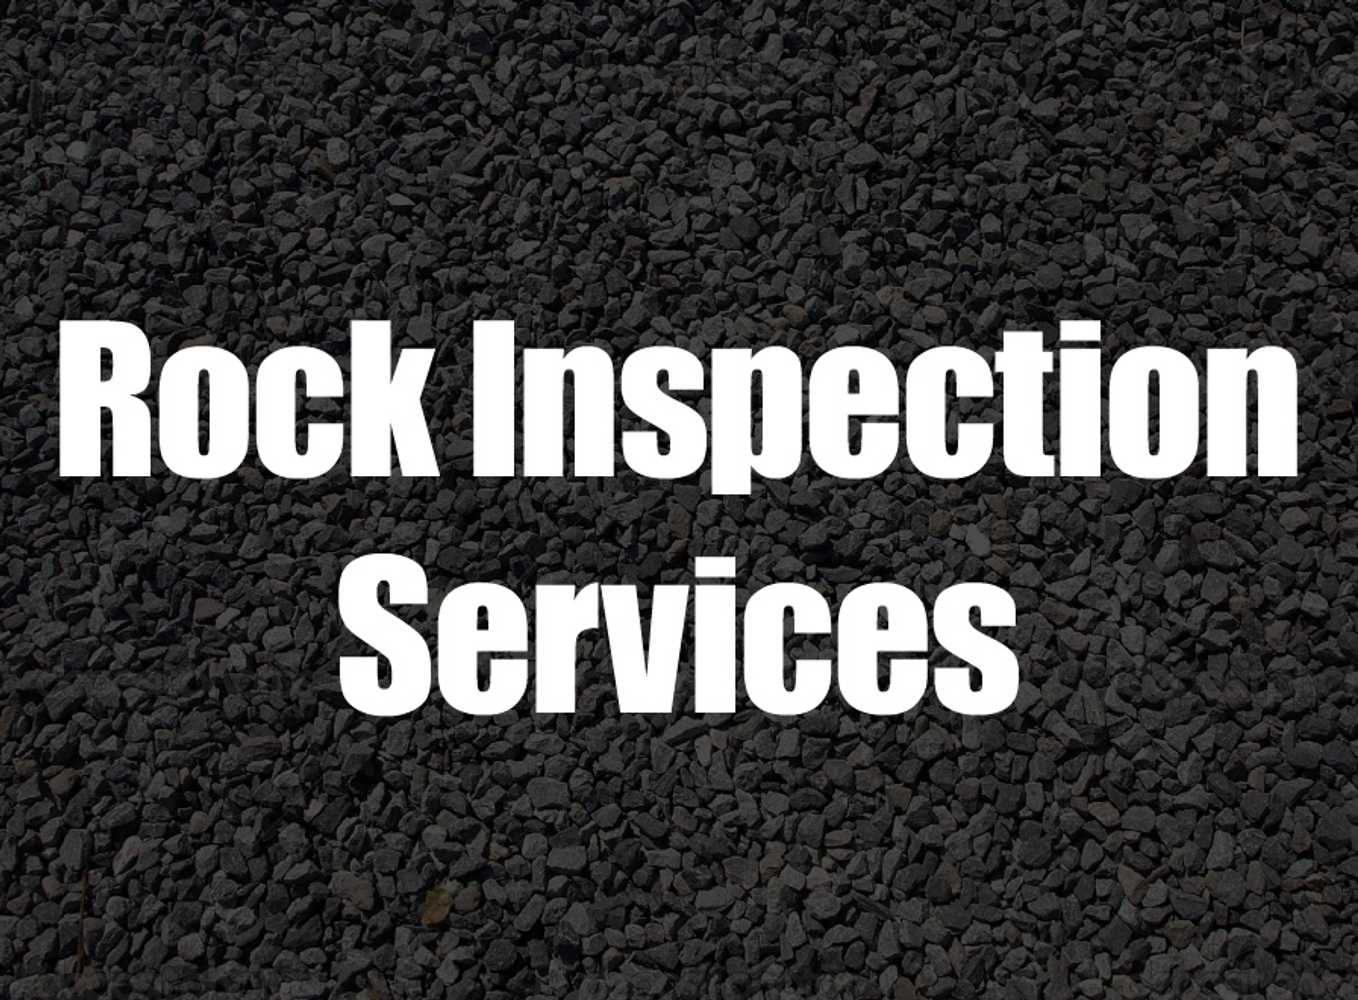 Projects by Rock Inspection Services